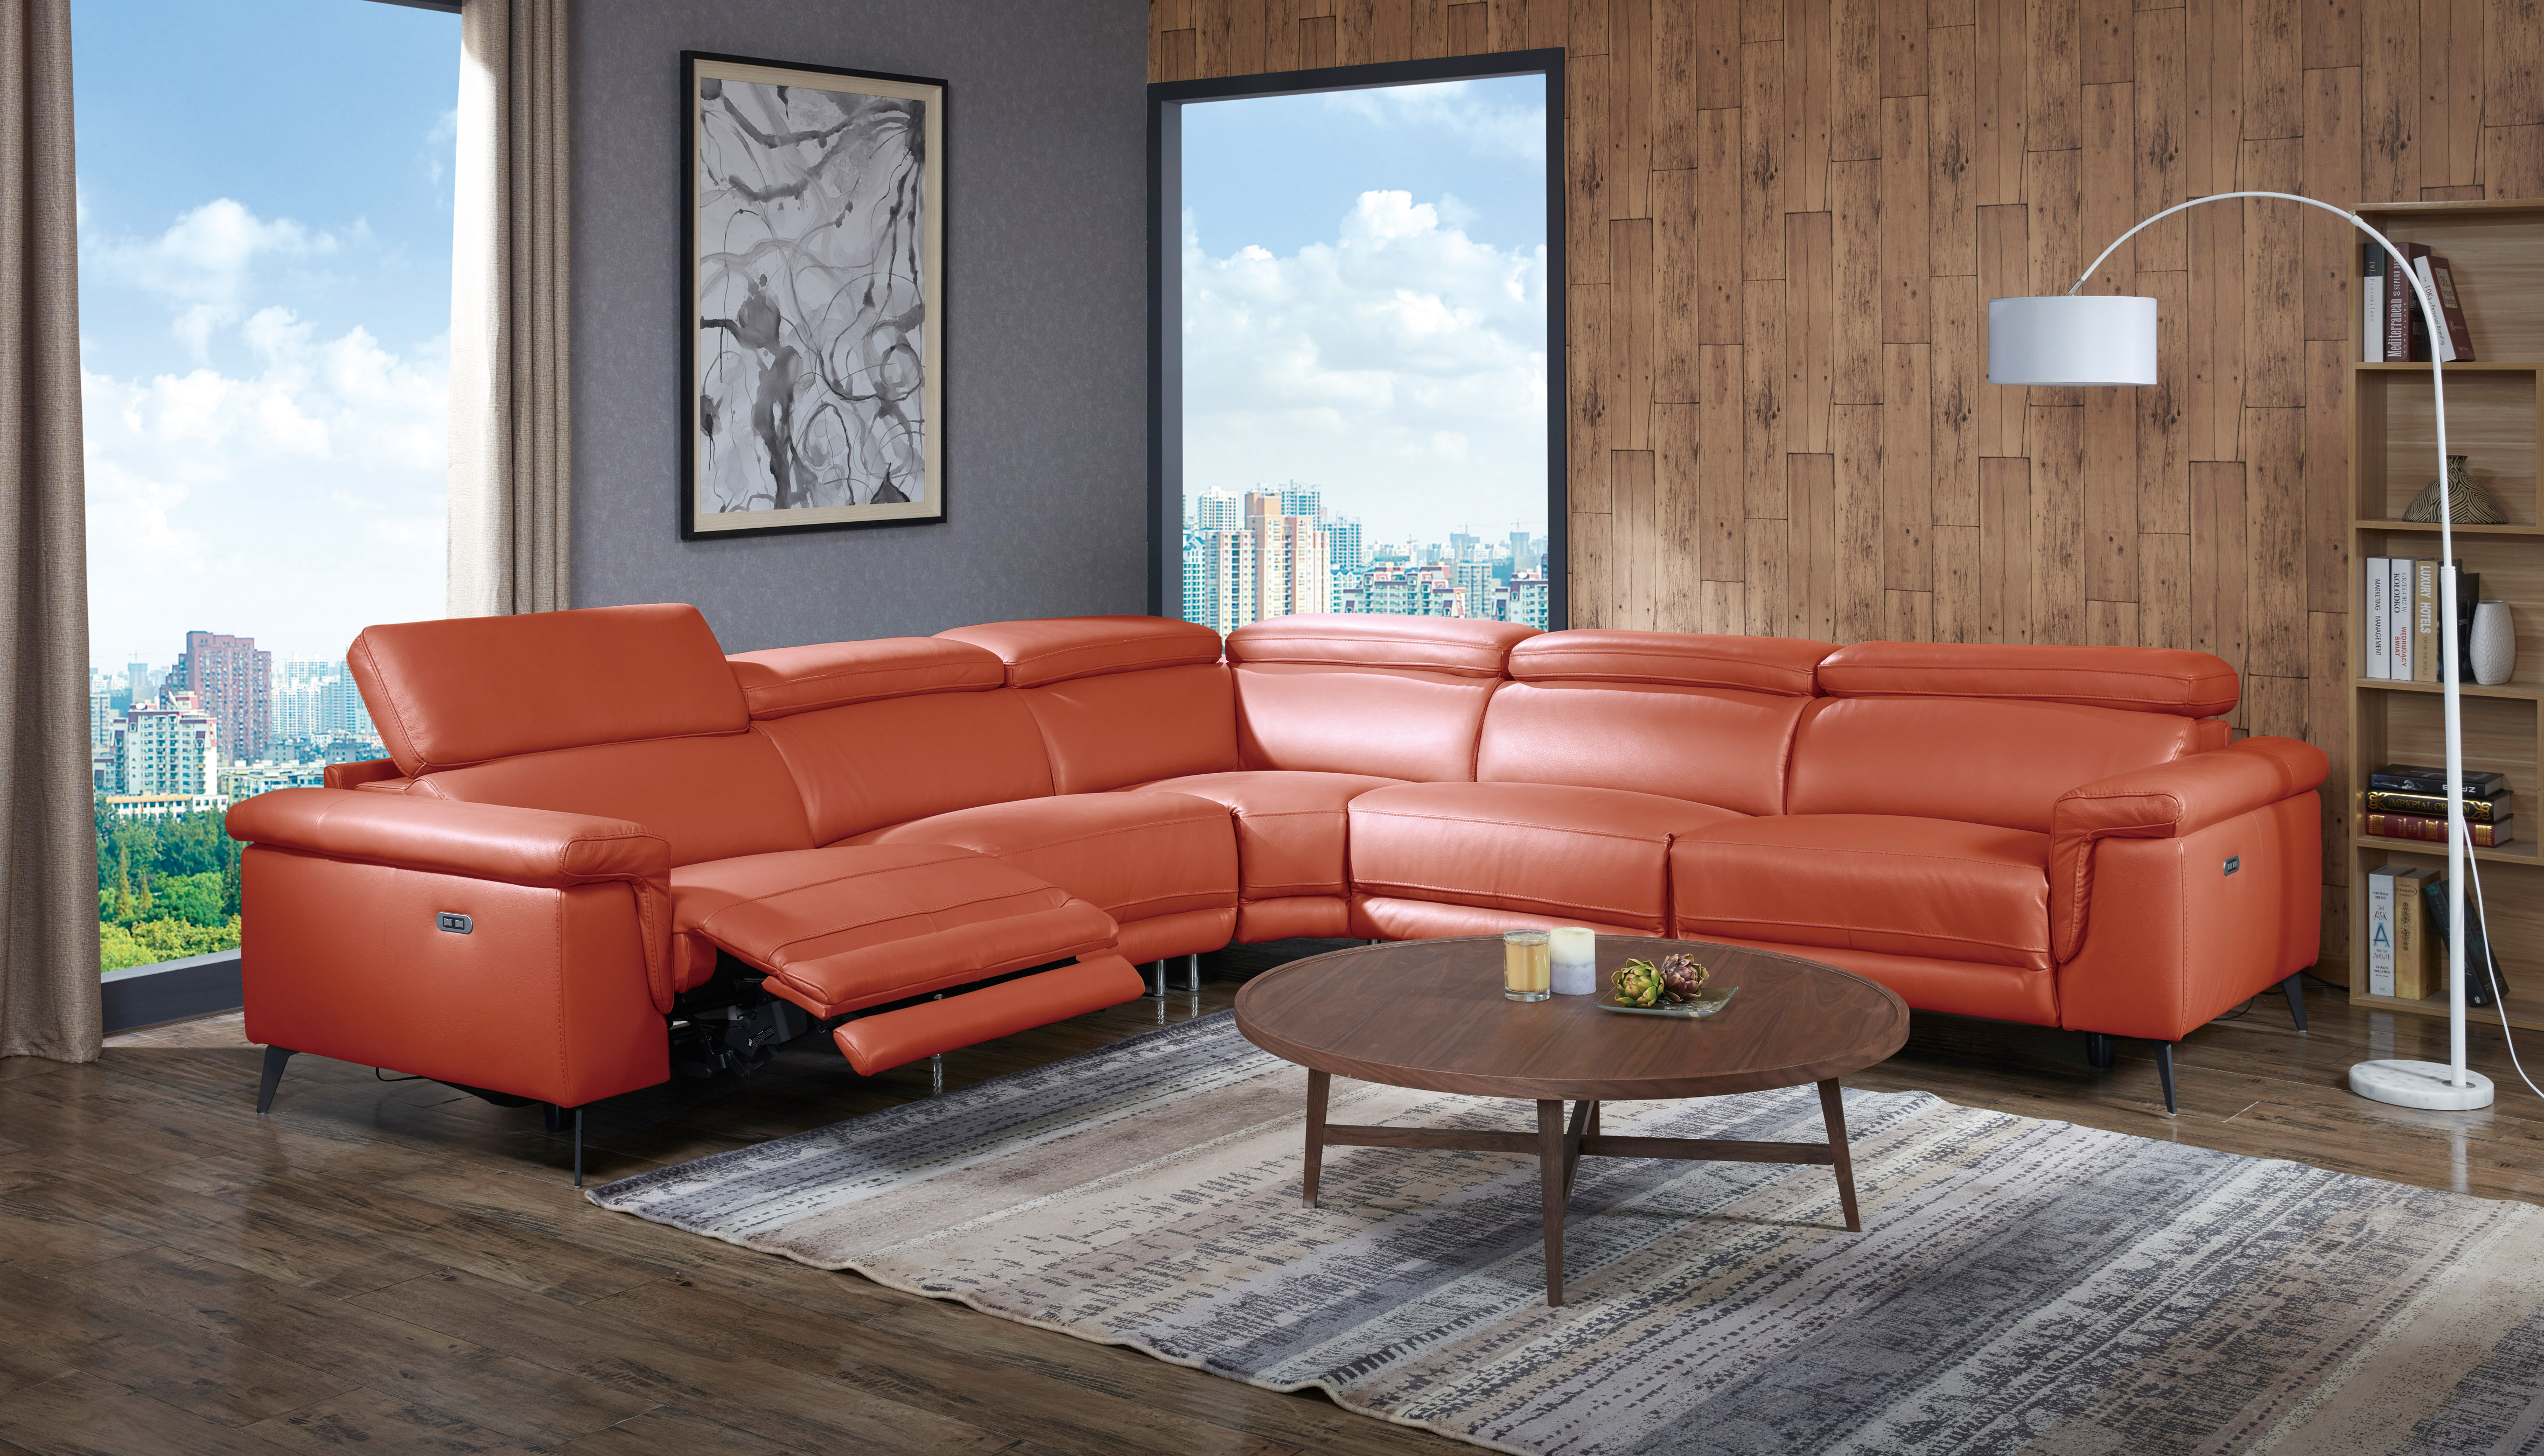 Elite Covered in Leather Sectional Beverly-Hills-Hendrix-Philippa